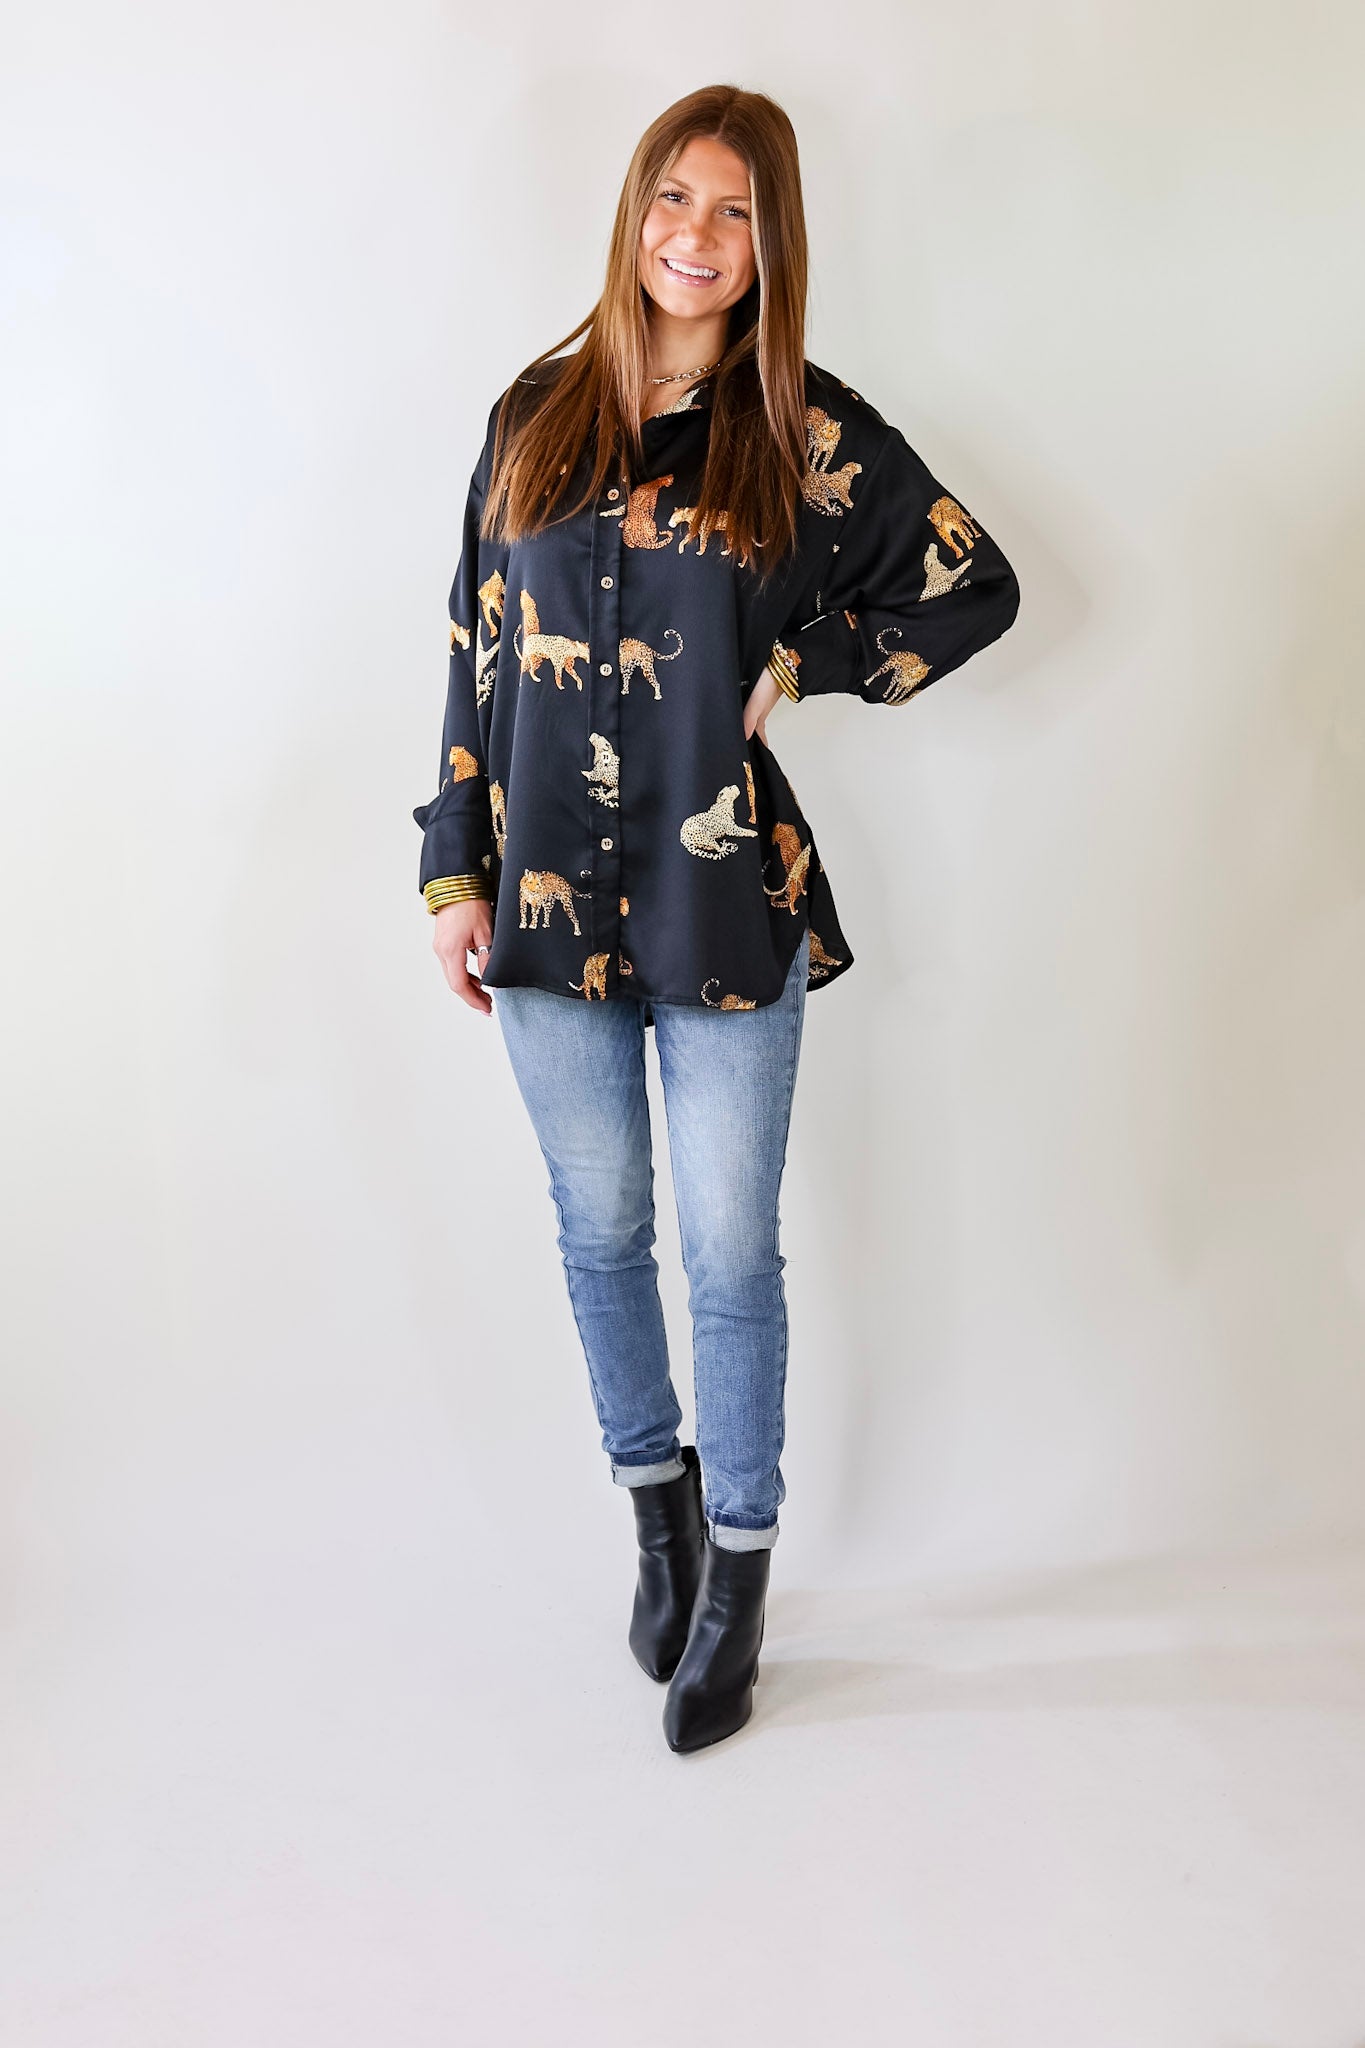 Tell Me Something Good Cheetah Print Long Sleeve Button Up Top in Black - Giddy Up Glamour Boutique